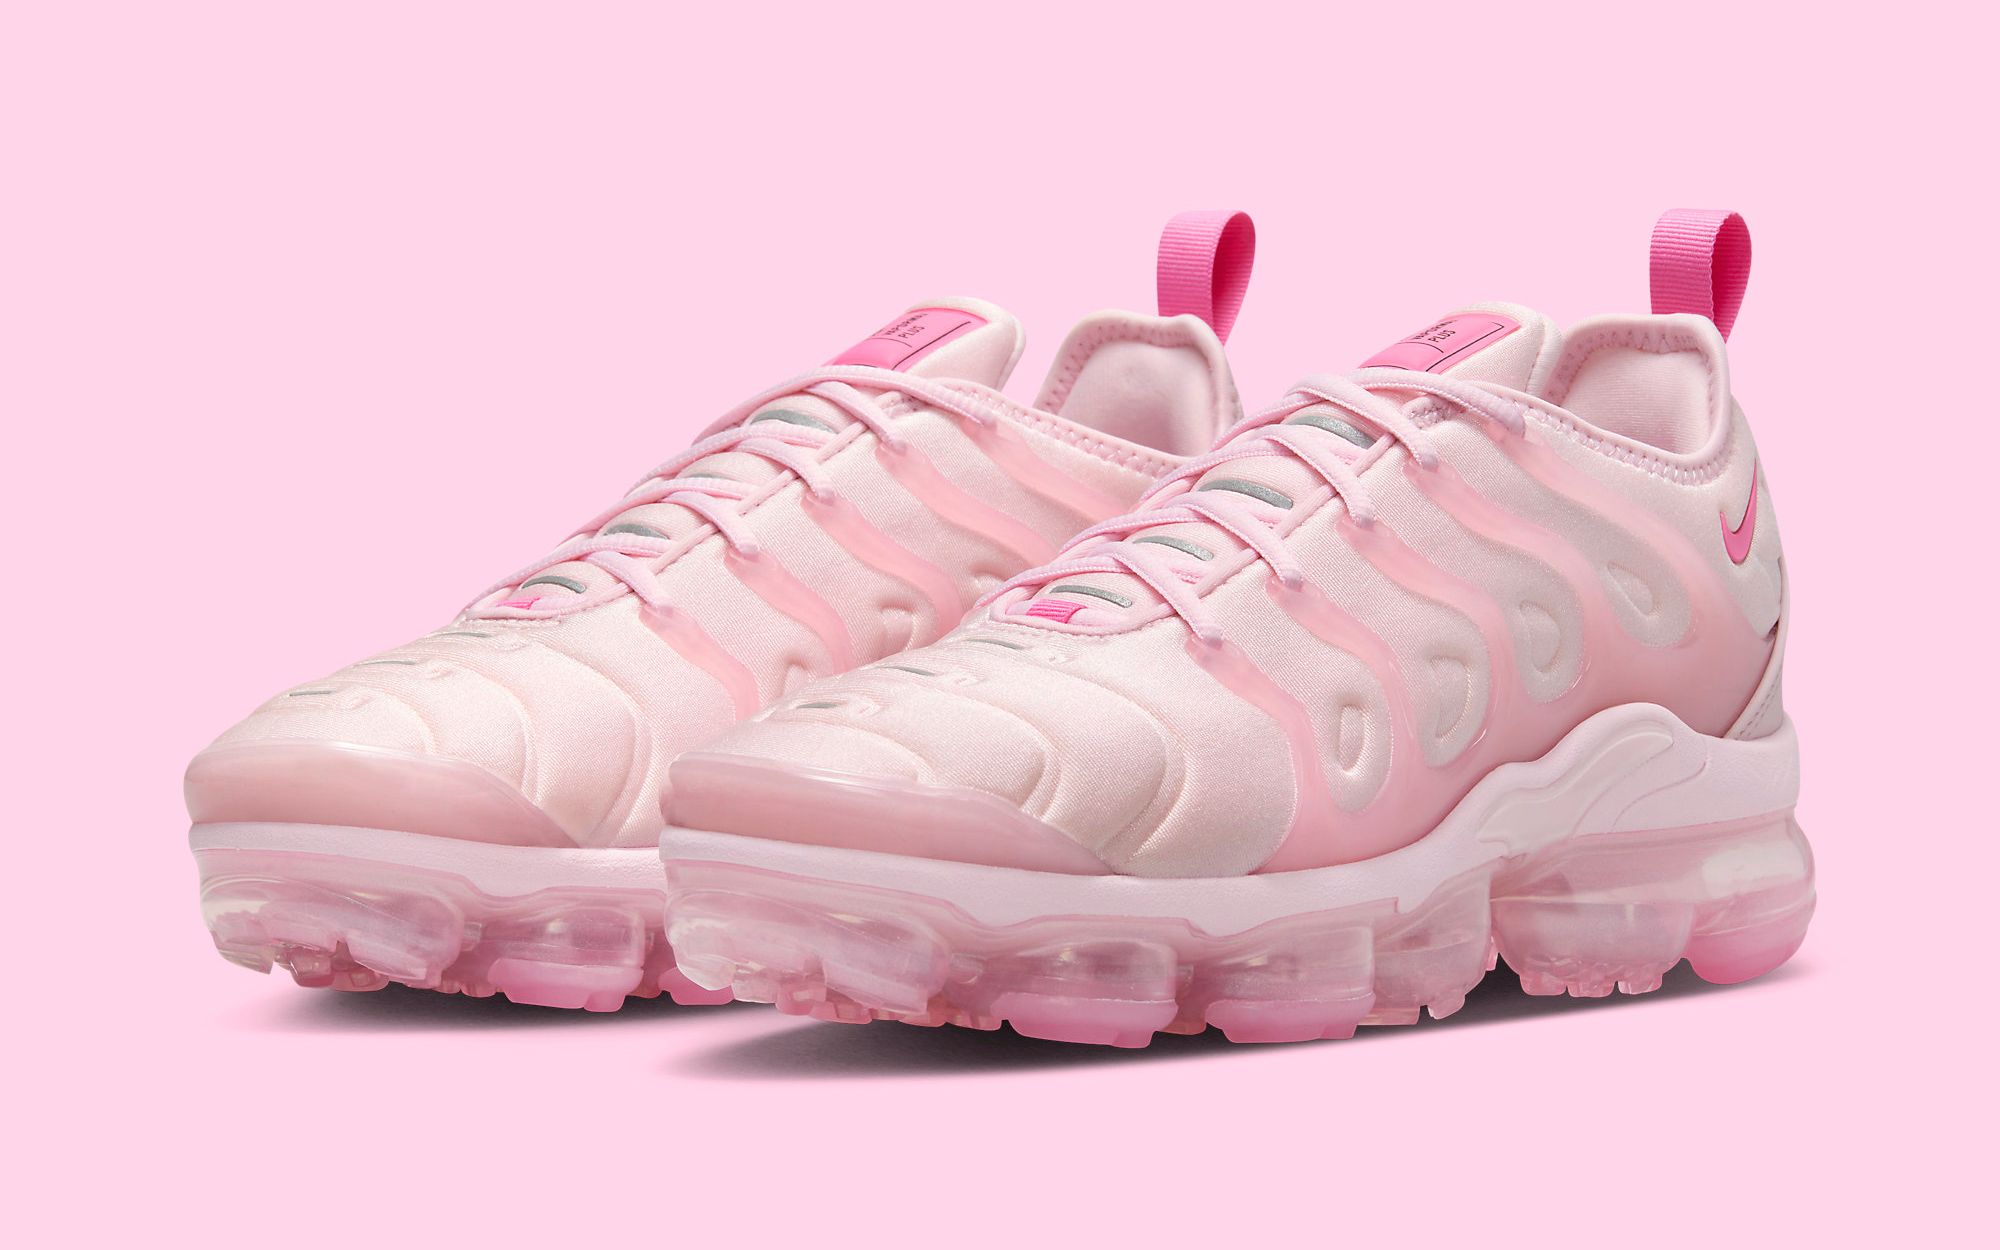 The Nike Air VaporMax Plus Pops Up in 